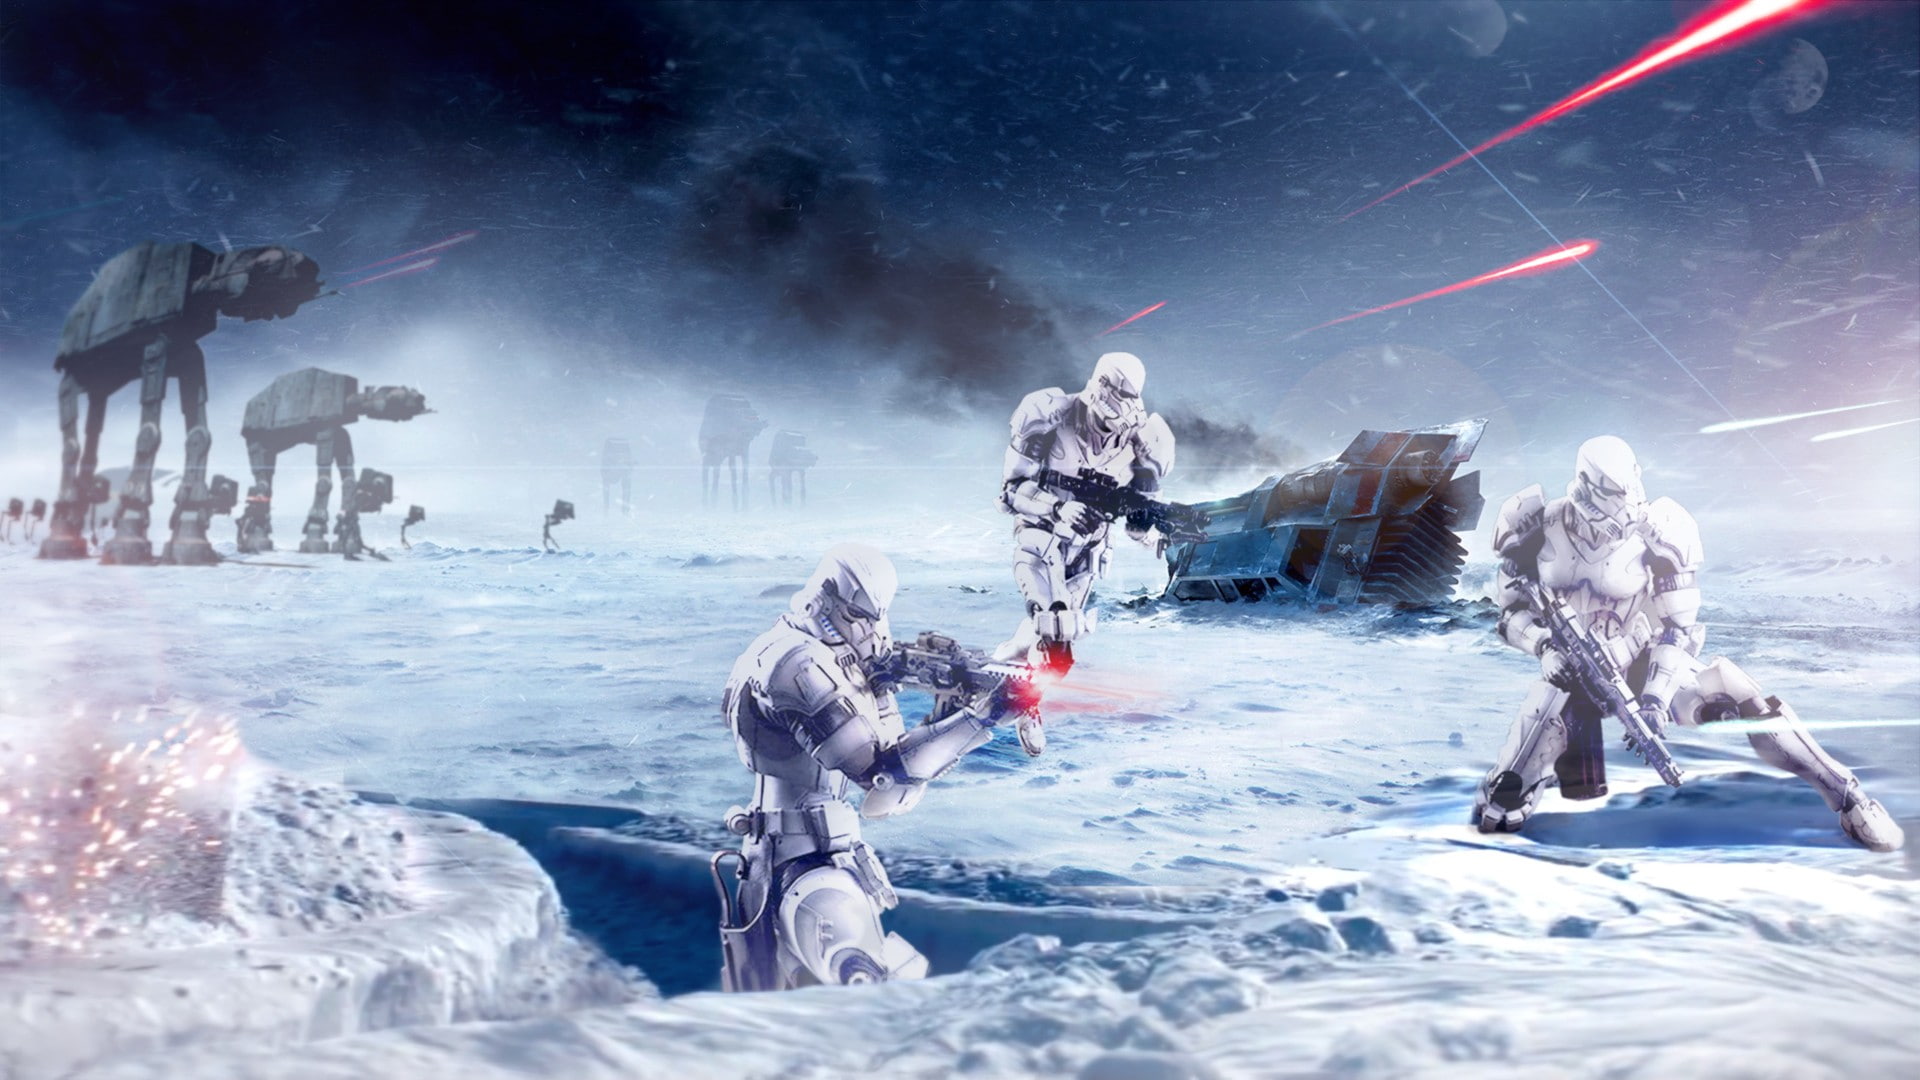 Galactic Empire, Hoth, stormtrooper, snow, Star Wars